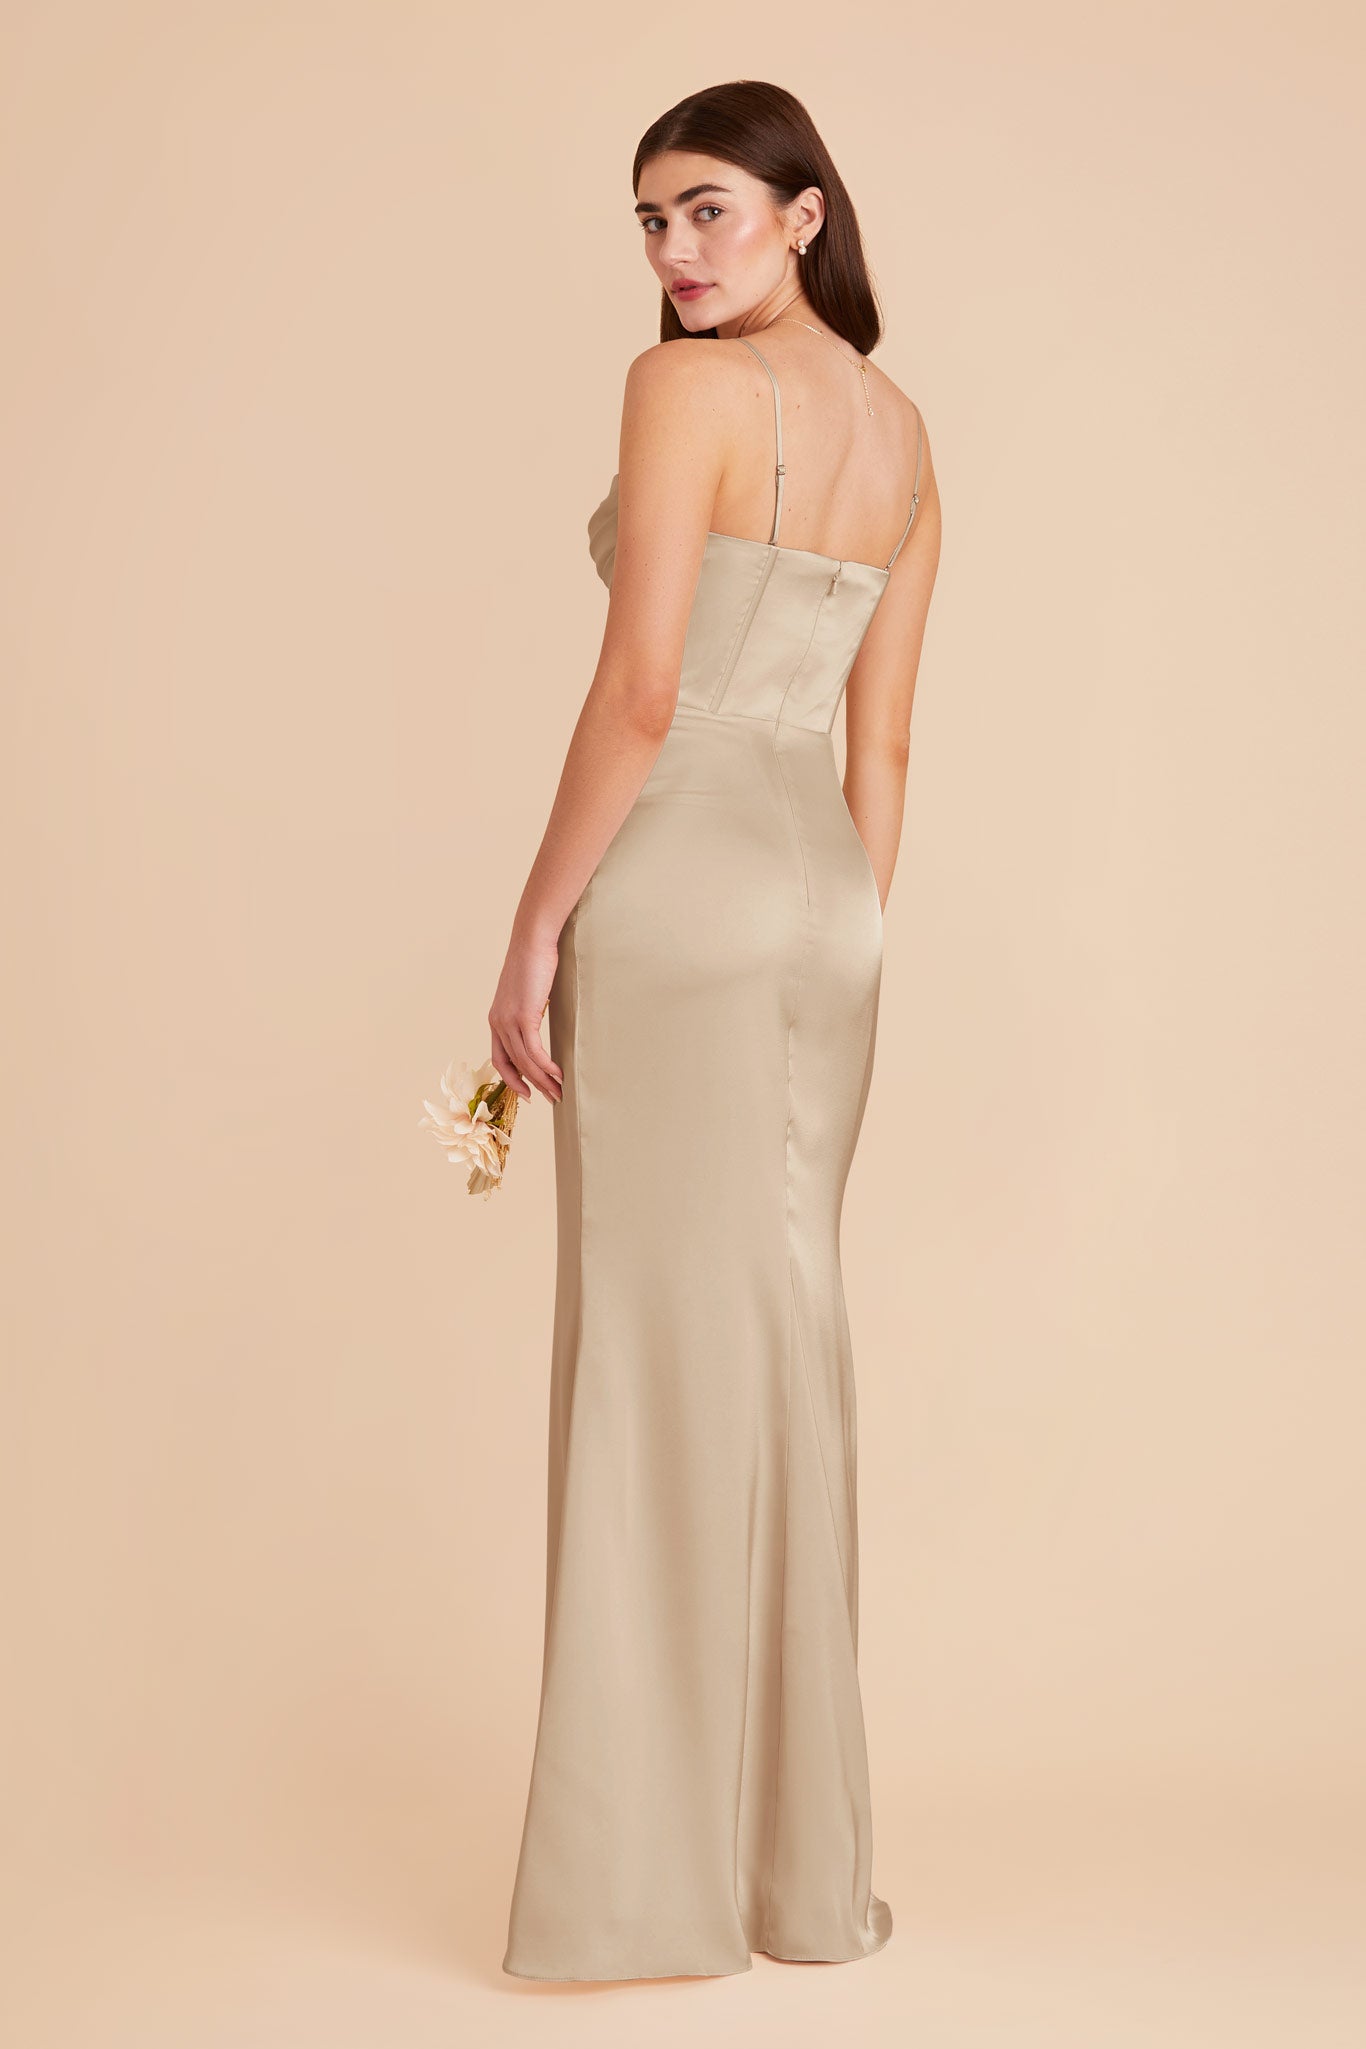 Neutral Champagne Carrie Matte Satin Dress by Birdy Grey